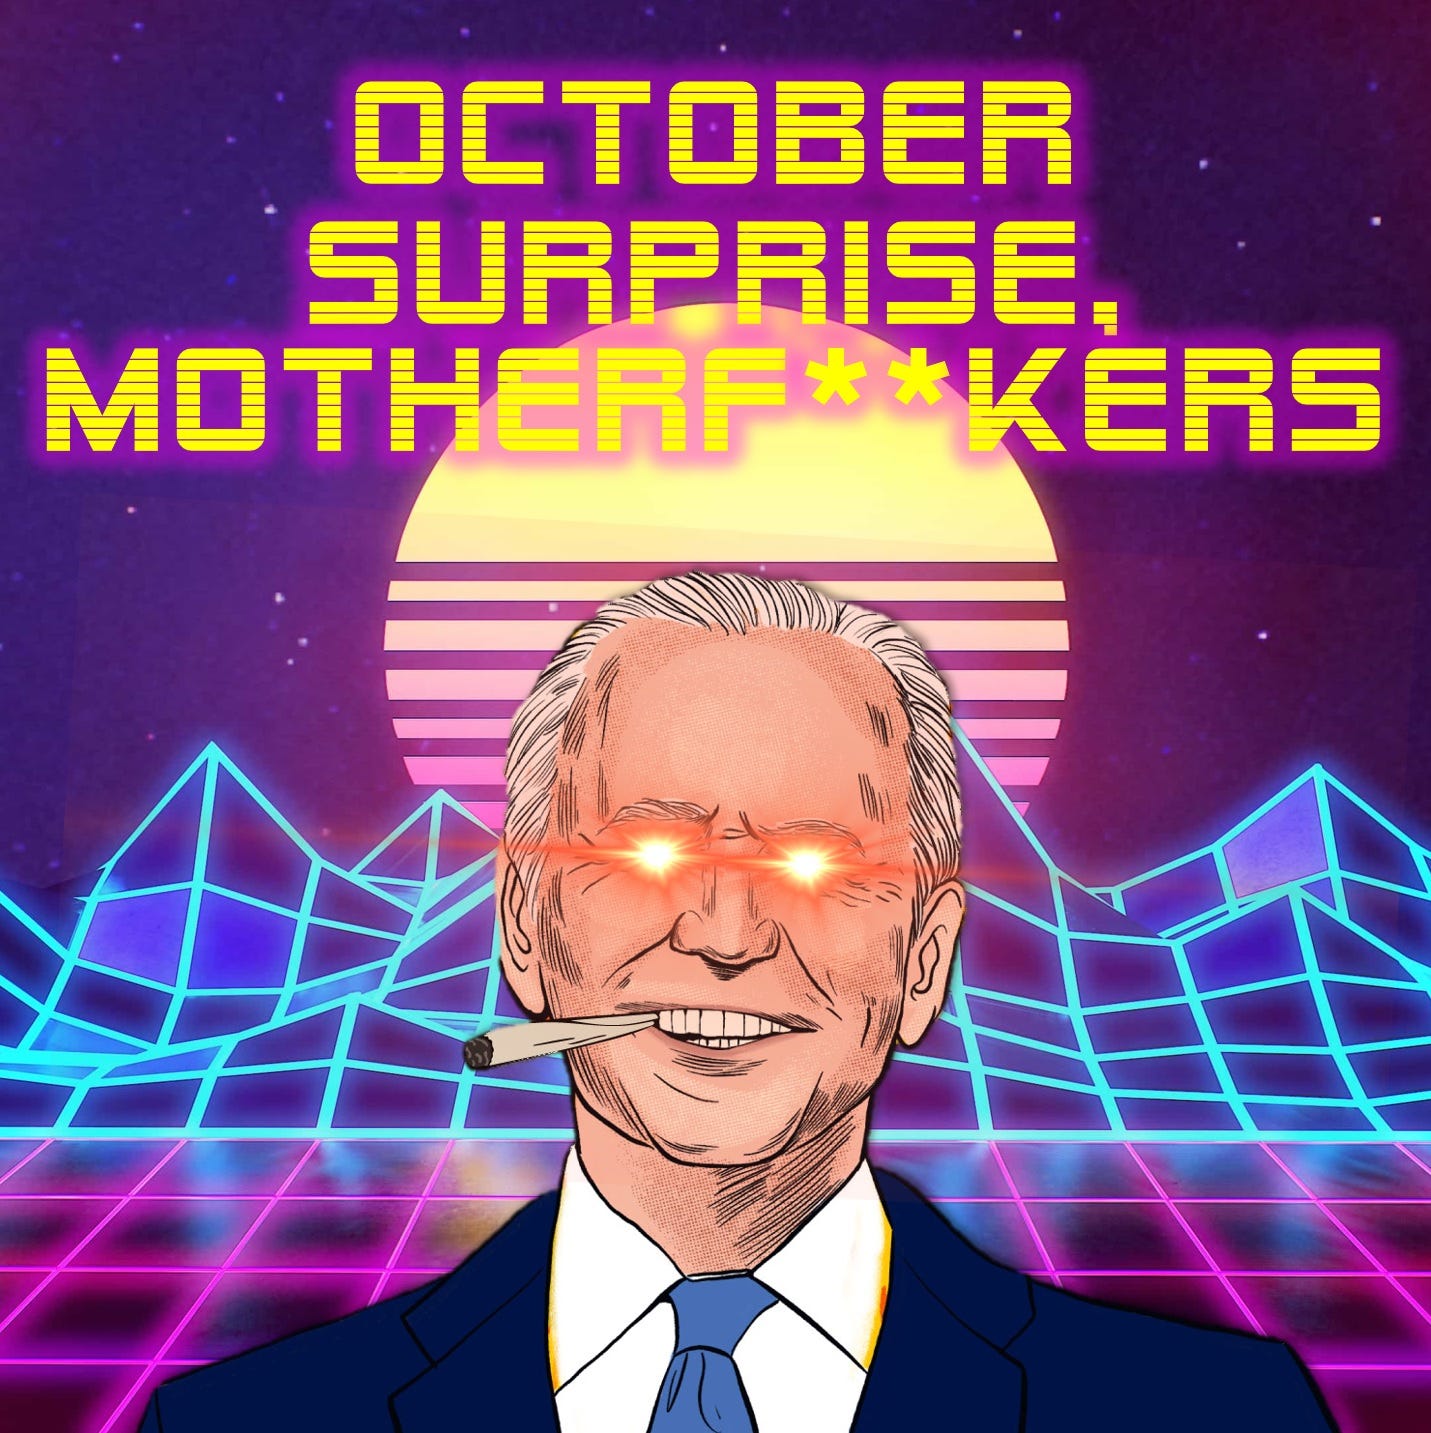 May be a cartoon of text that says 'OCTOBER SURPRISE MOTHERF**KERS'